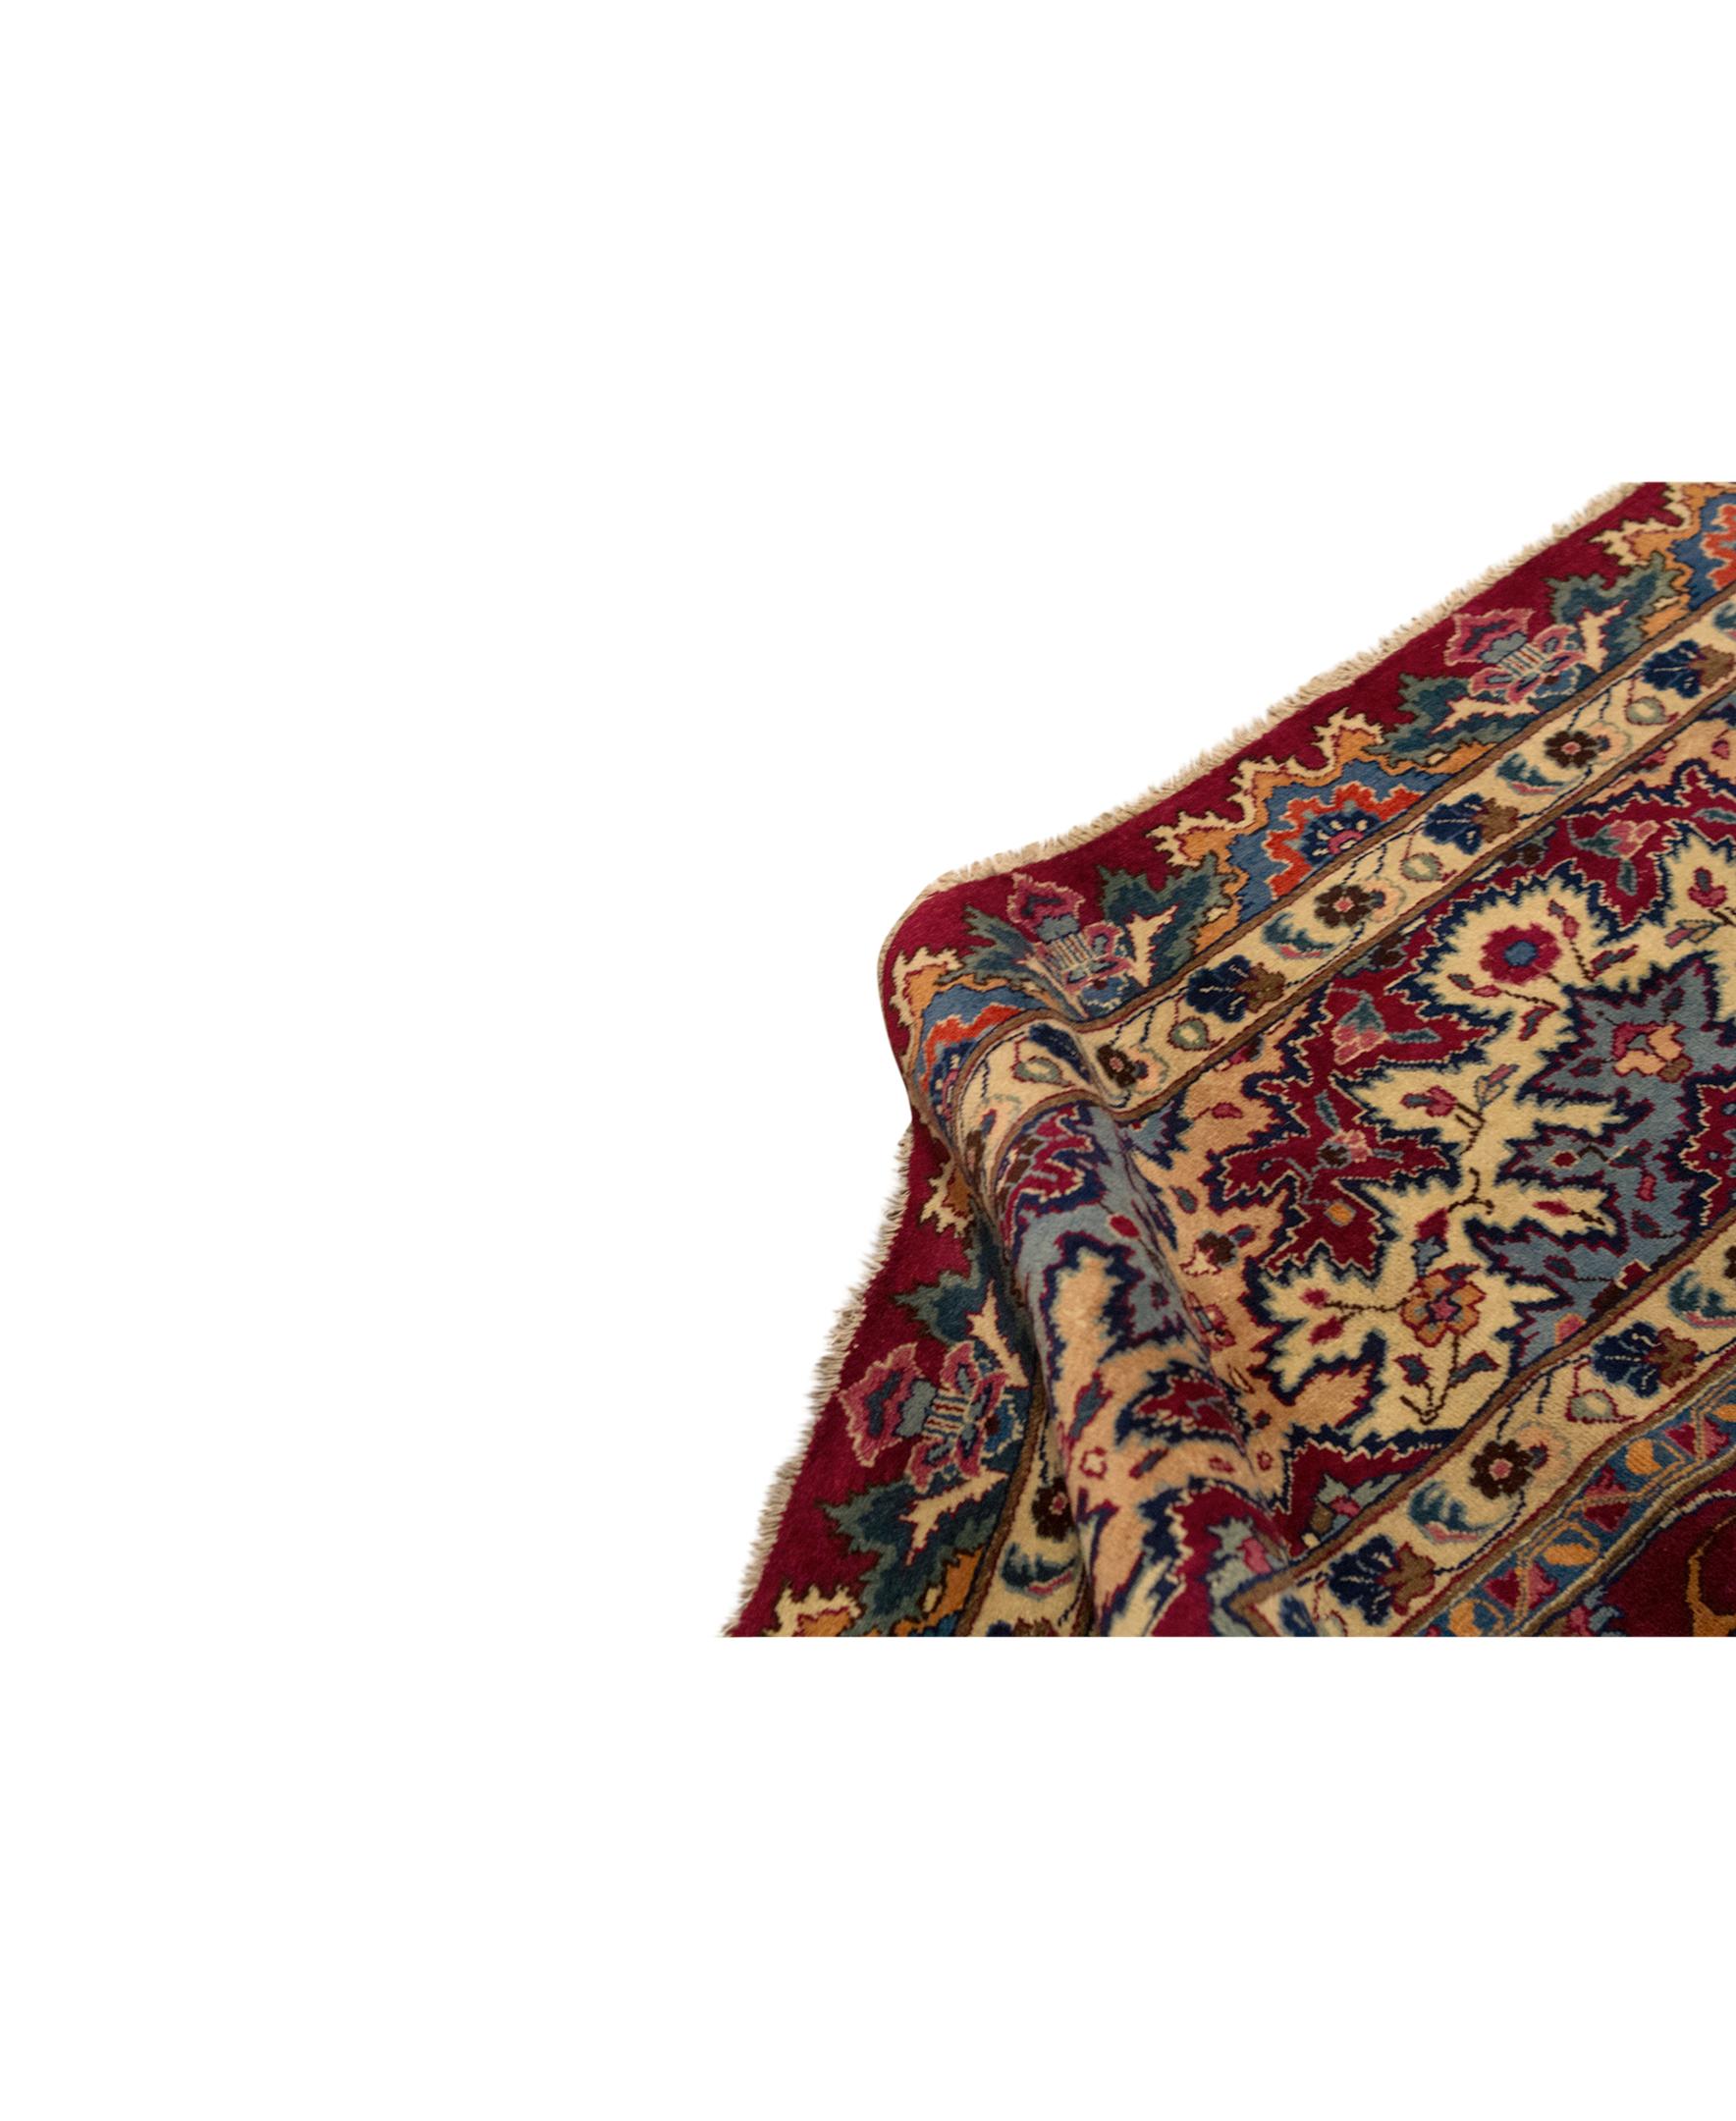 Hand-Woven Antique Persian fine Traditional Handwoven Luxury Wool Red / Blue Rug